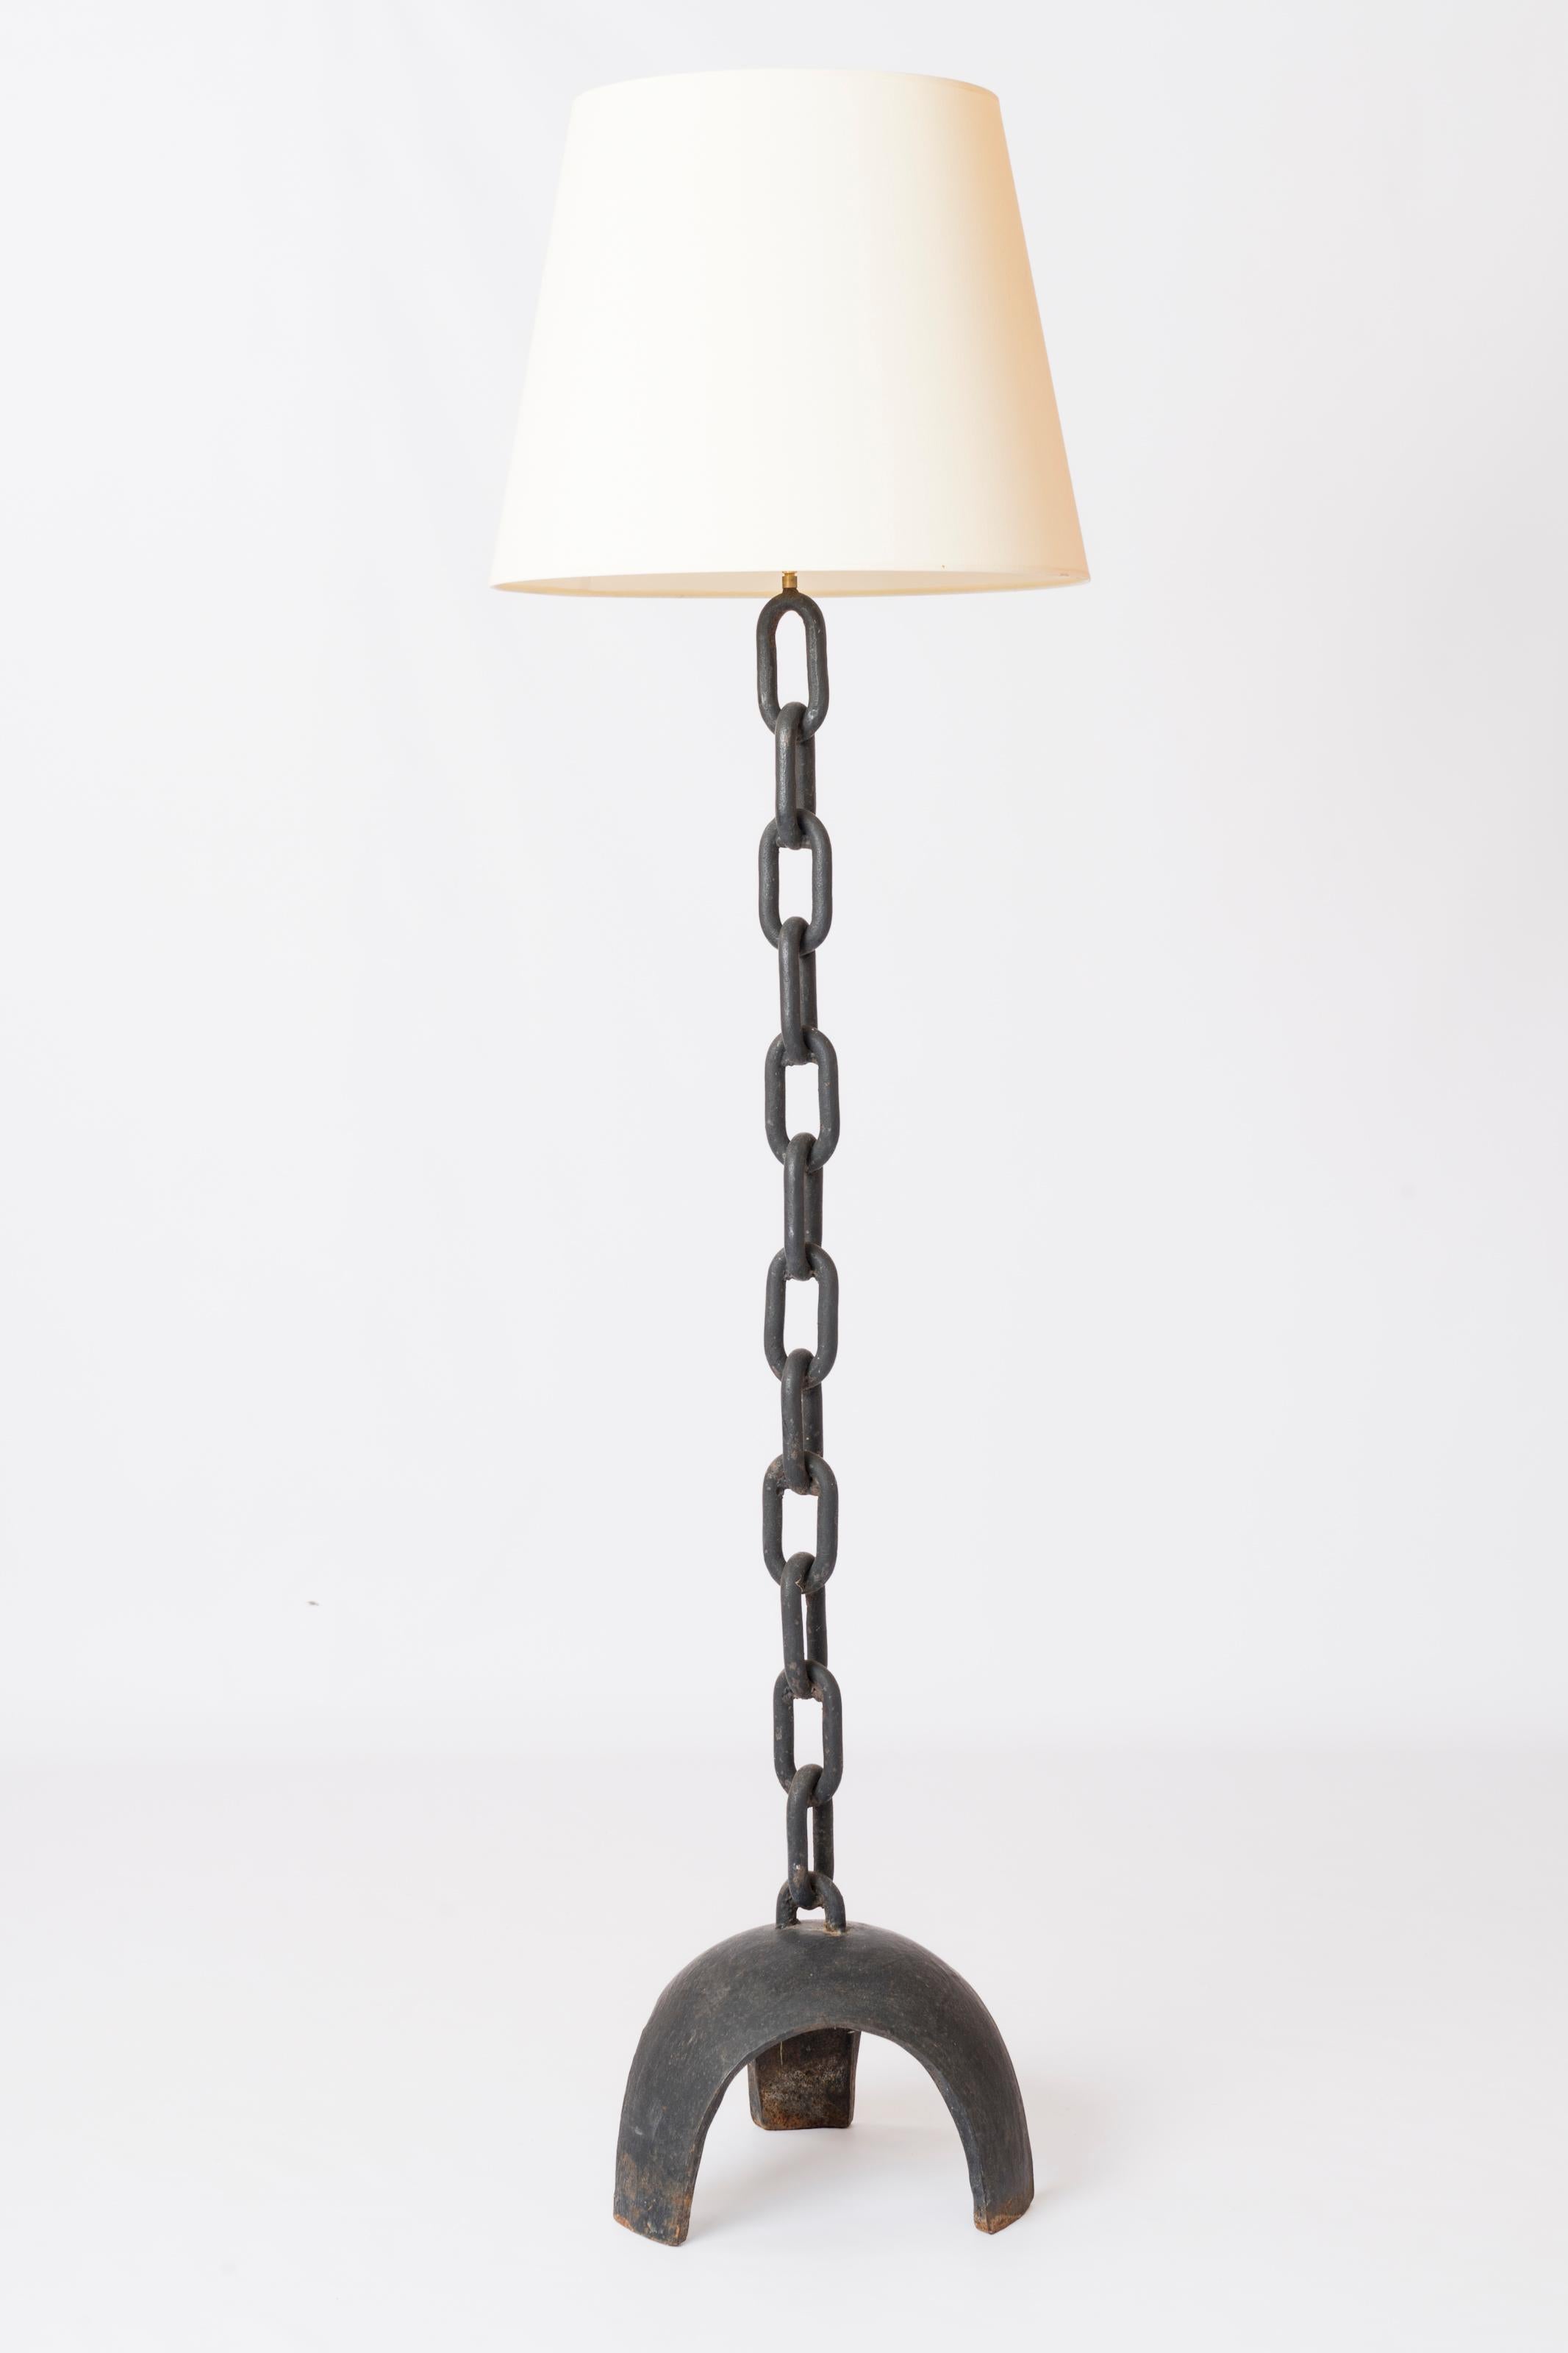 Graphic solid cast iron base and welded marine chain pole floor lamp.
In the style of Franz West.  Needs to be wired.
Dimensions shown for lamp without shade.
Shade for showing purposes only.
This lamp will ship from France and can be returned to